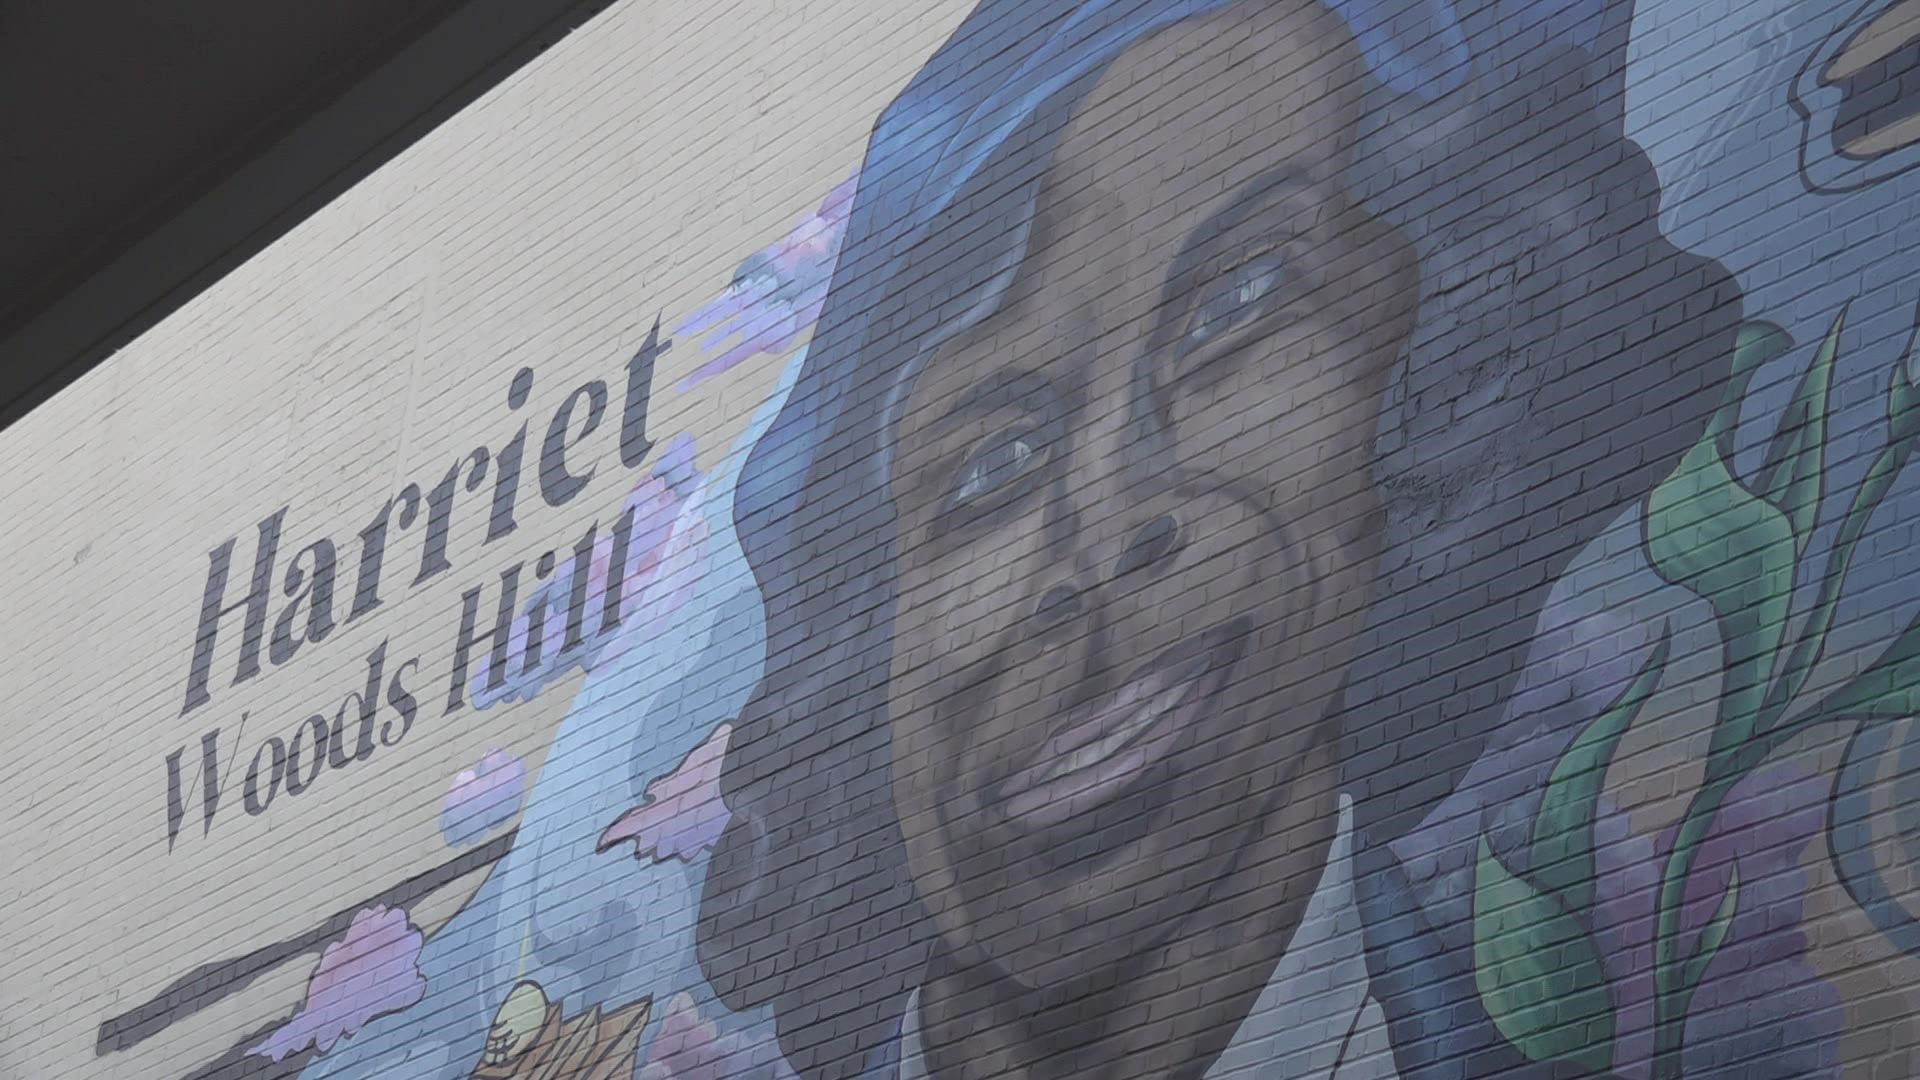 An alley next to GRPD headquarters has been renamed "Harriet Woods Hill Way" and it features a mural bearing her likeness.